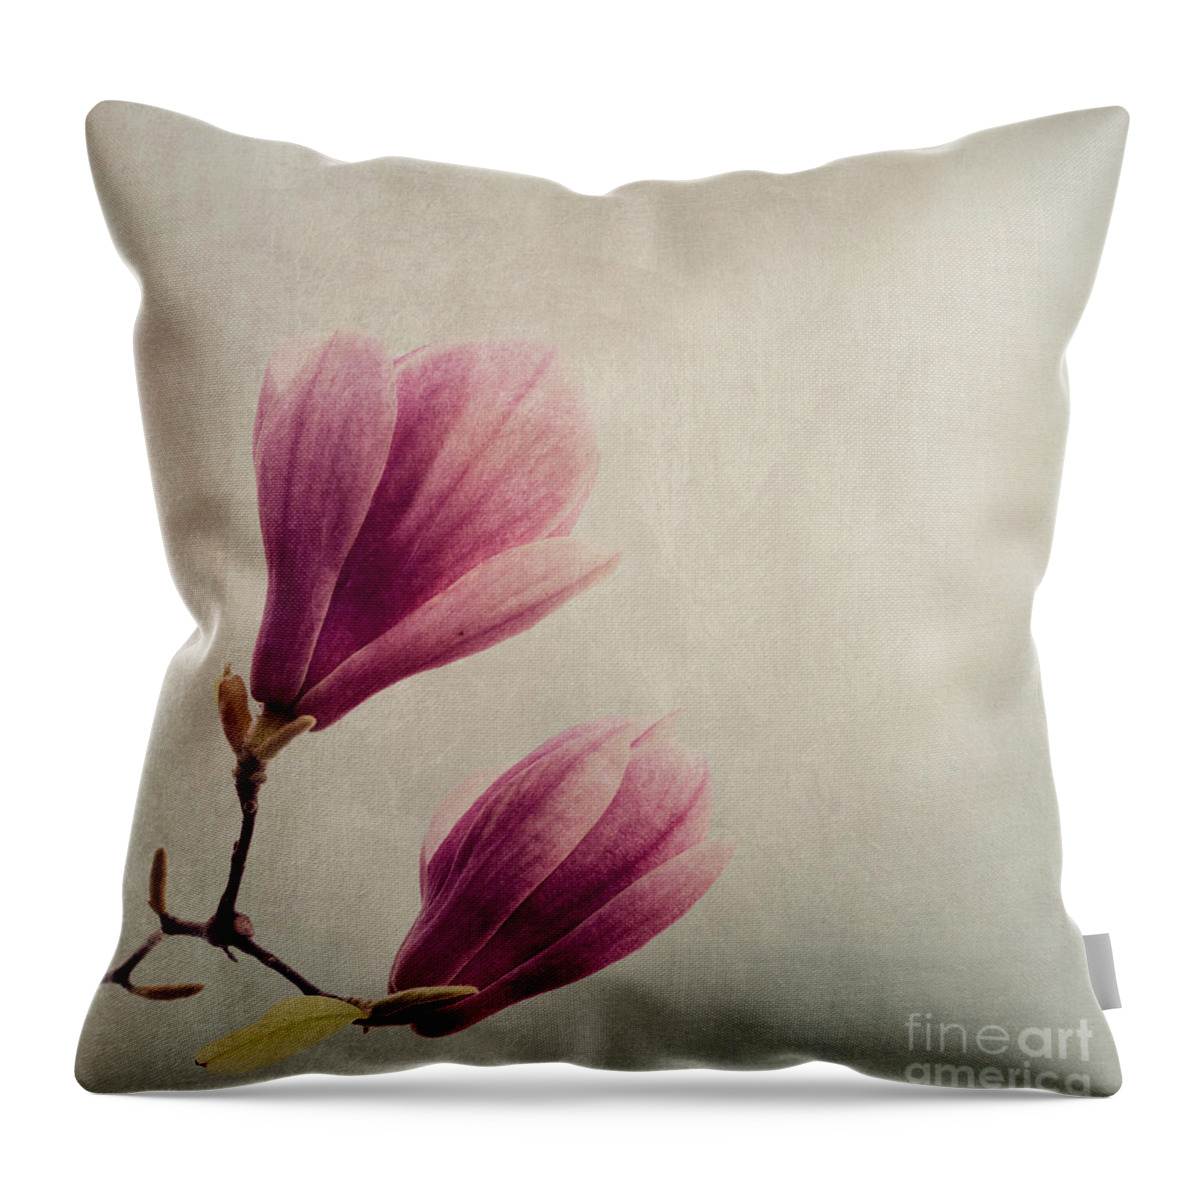 Magnolia Throw Pillow featuring the photograph Magnolia flower on art texture by Jelena Jovanovic